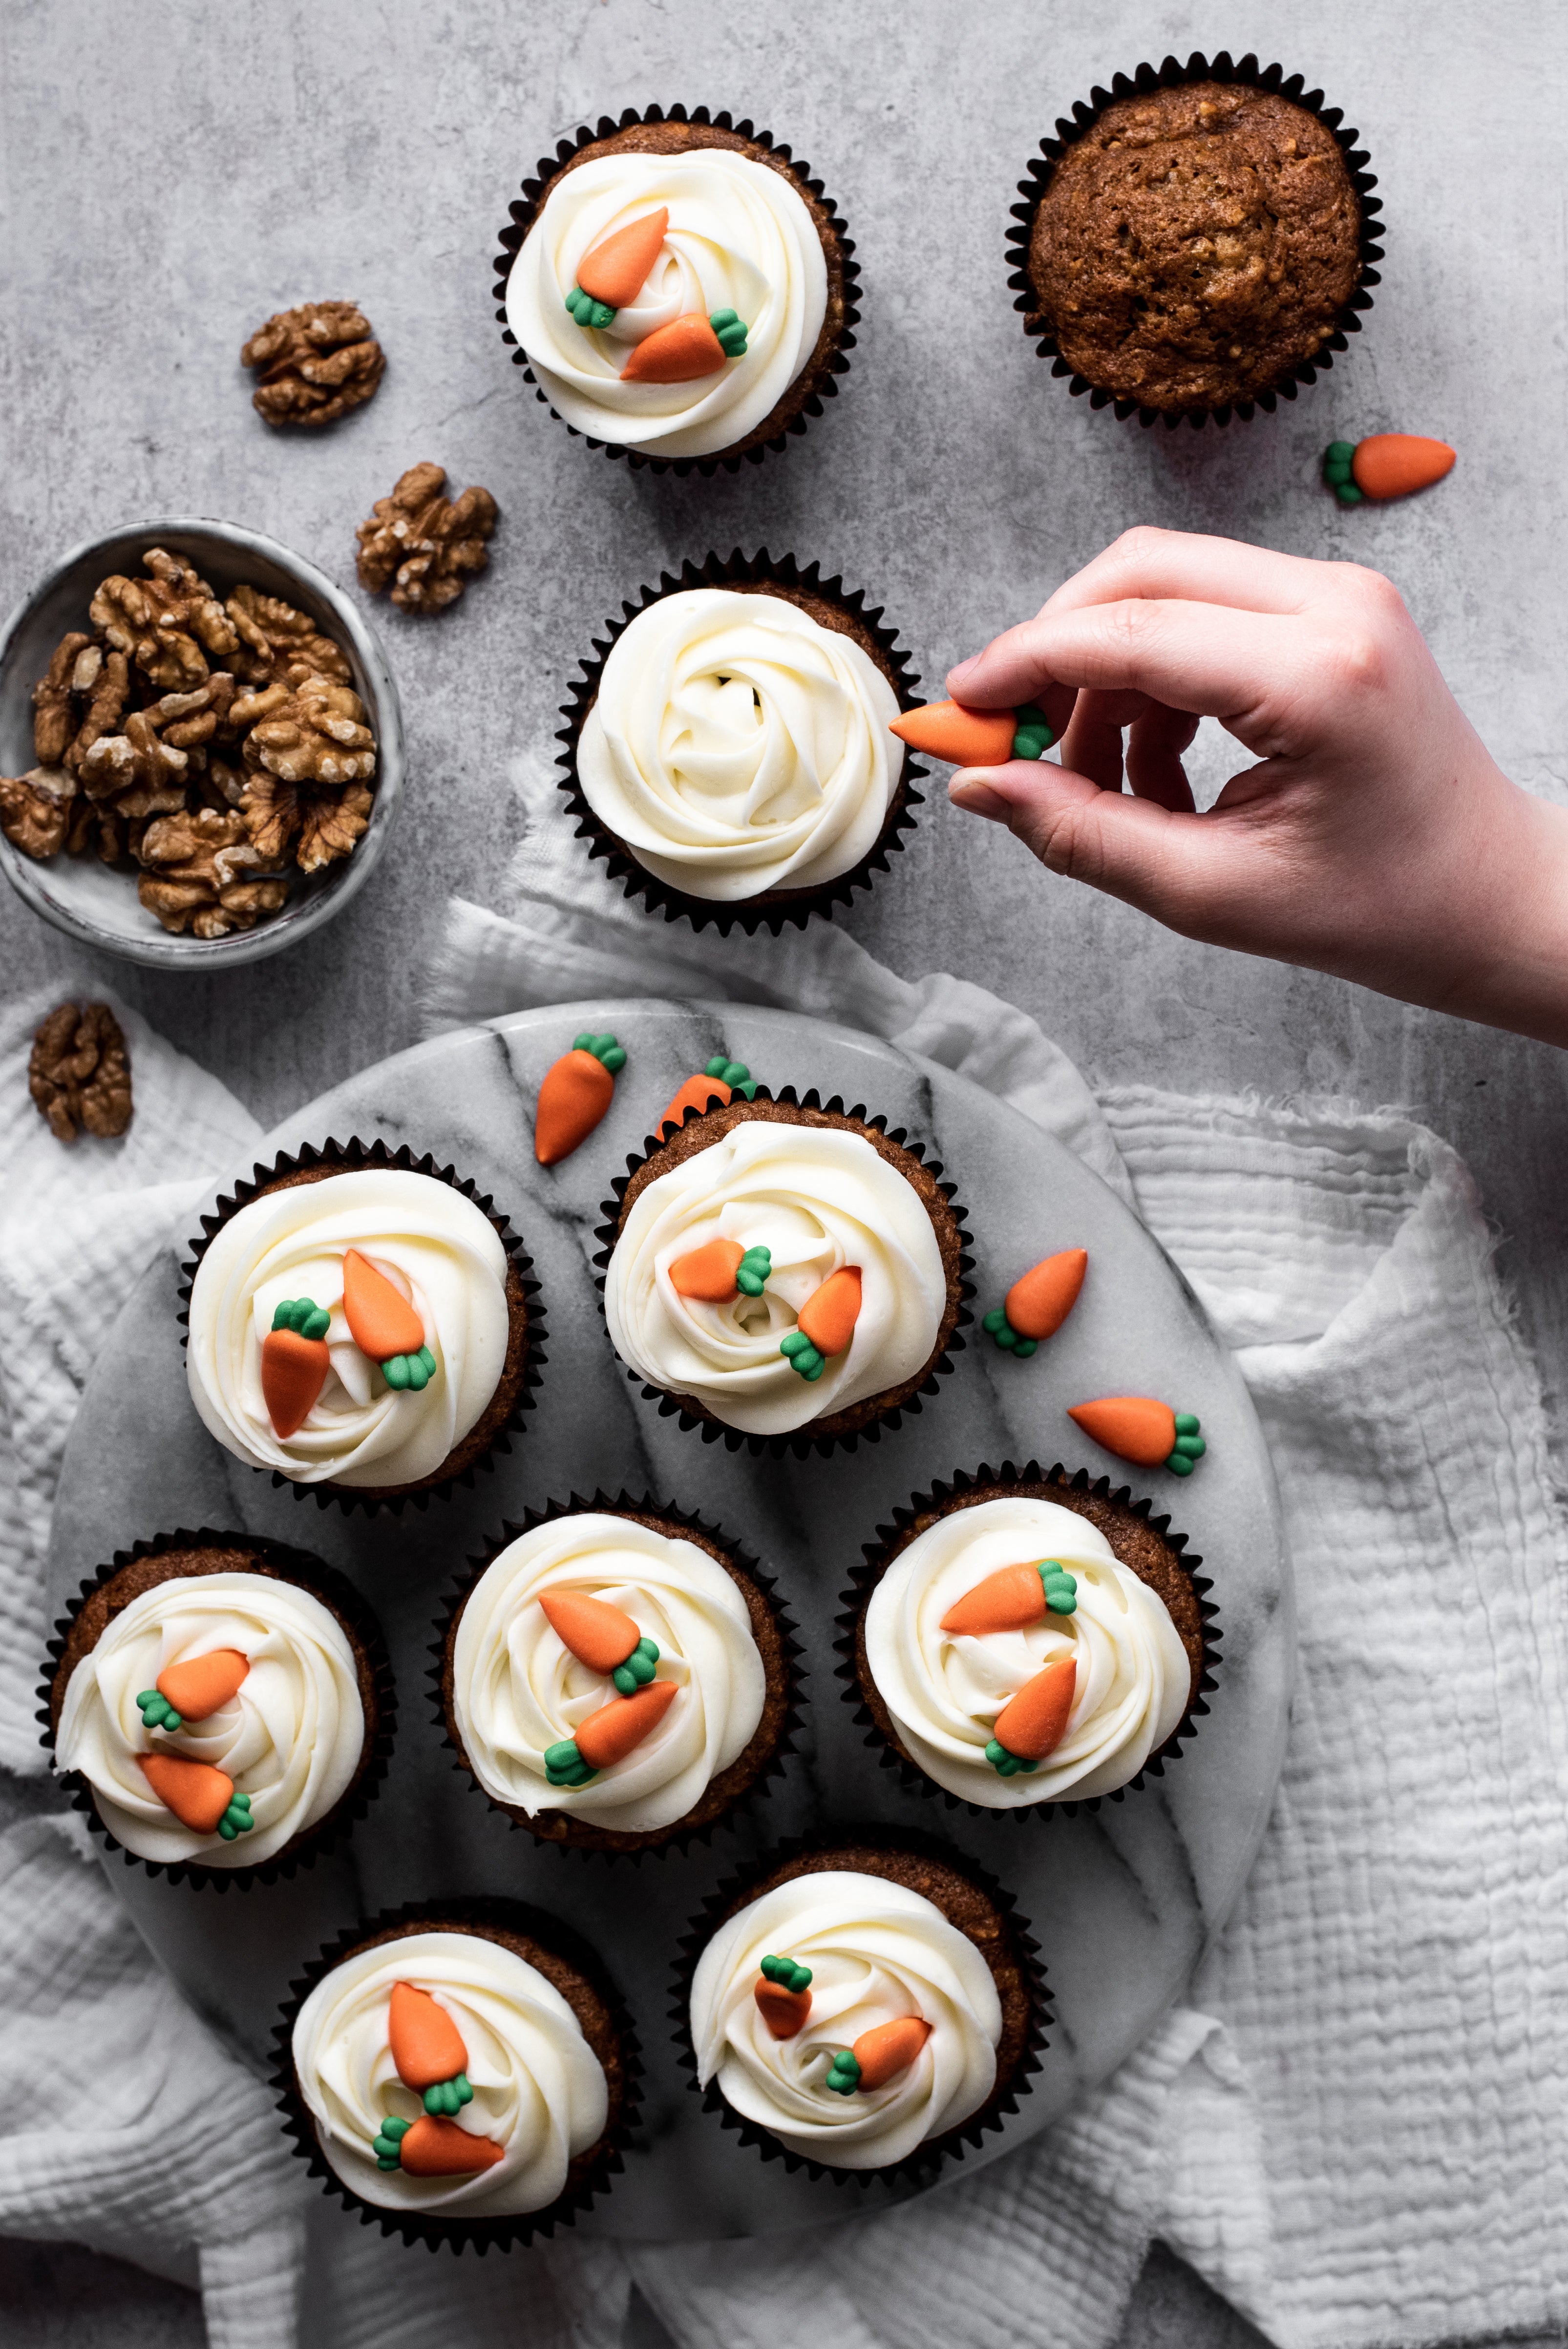 Carrot cake cupcakes with cream cheese icing and carrot decorations